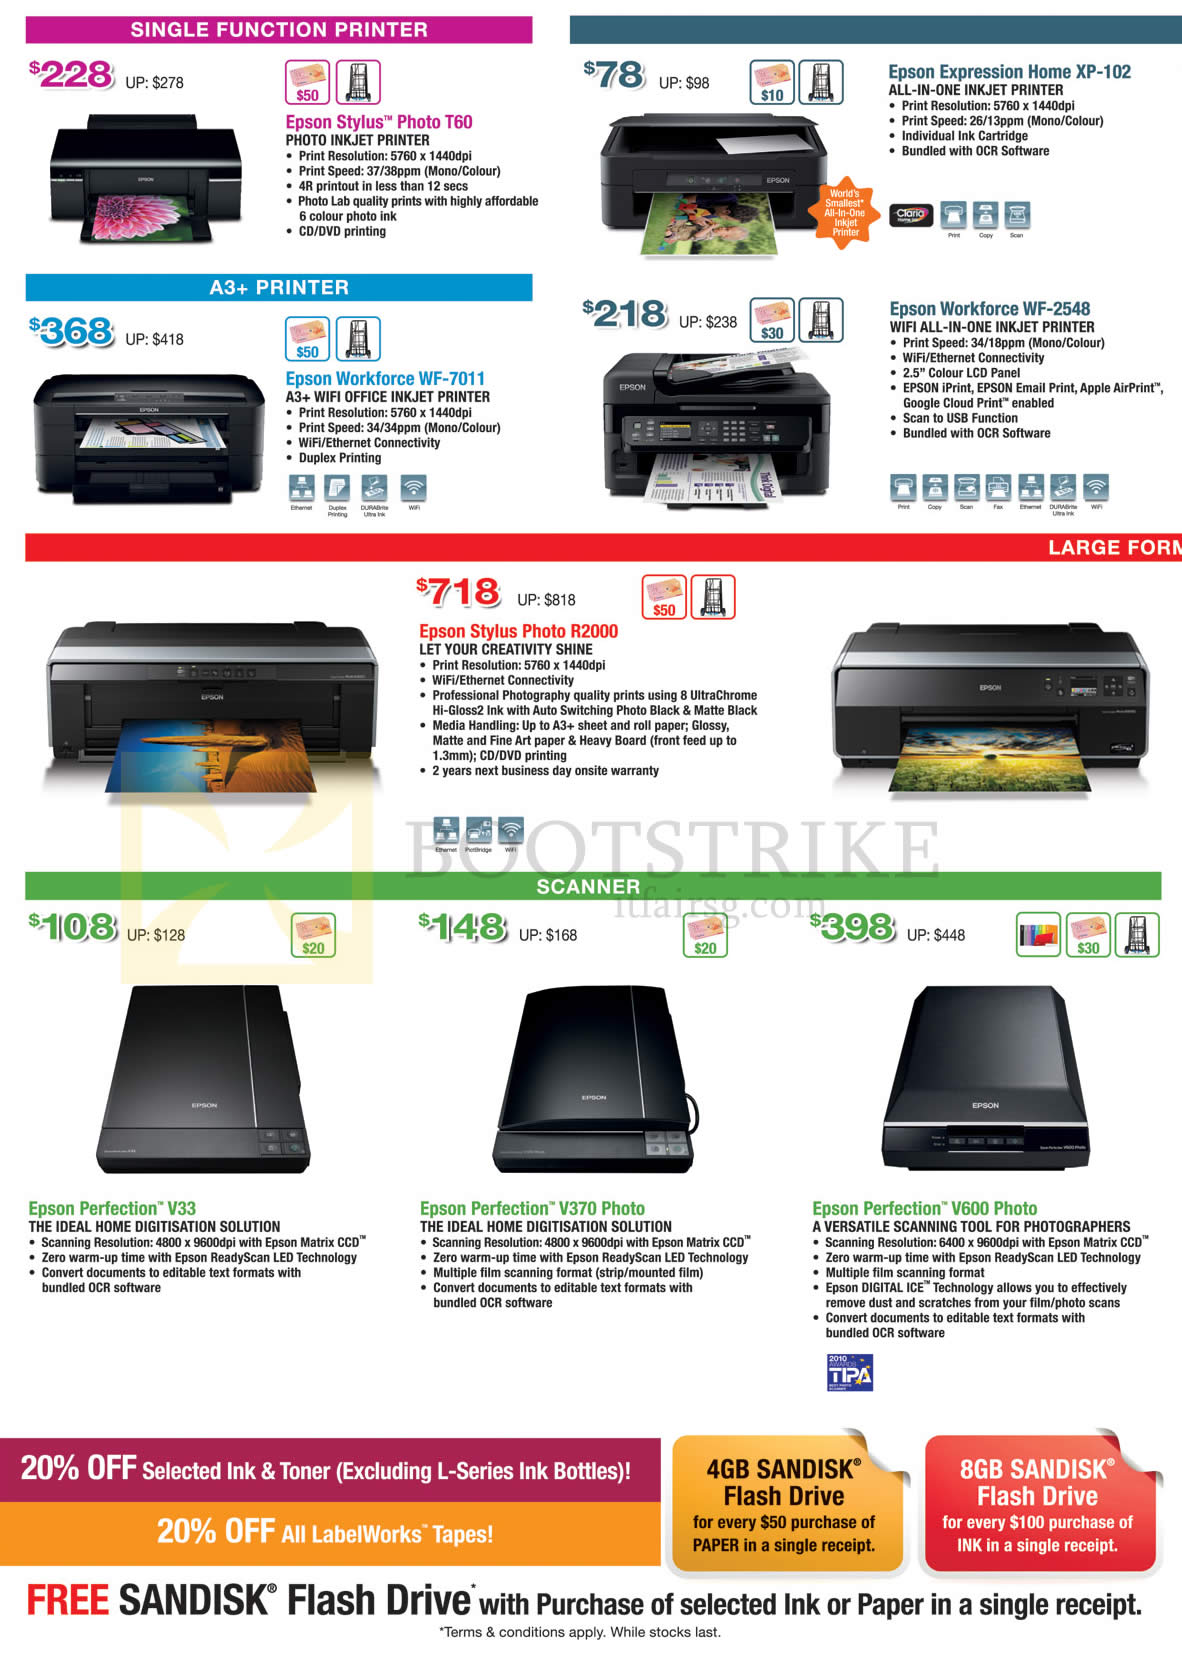 SITEX 2013 price list image brochure of Epson Printers, Scanners, Stylus Photo T60, Workforce WF-7011, Expression Home XP-102, Stylus R2000, Perfection V33, V370, V600